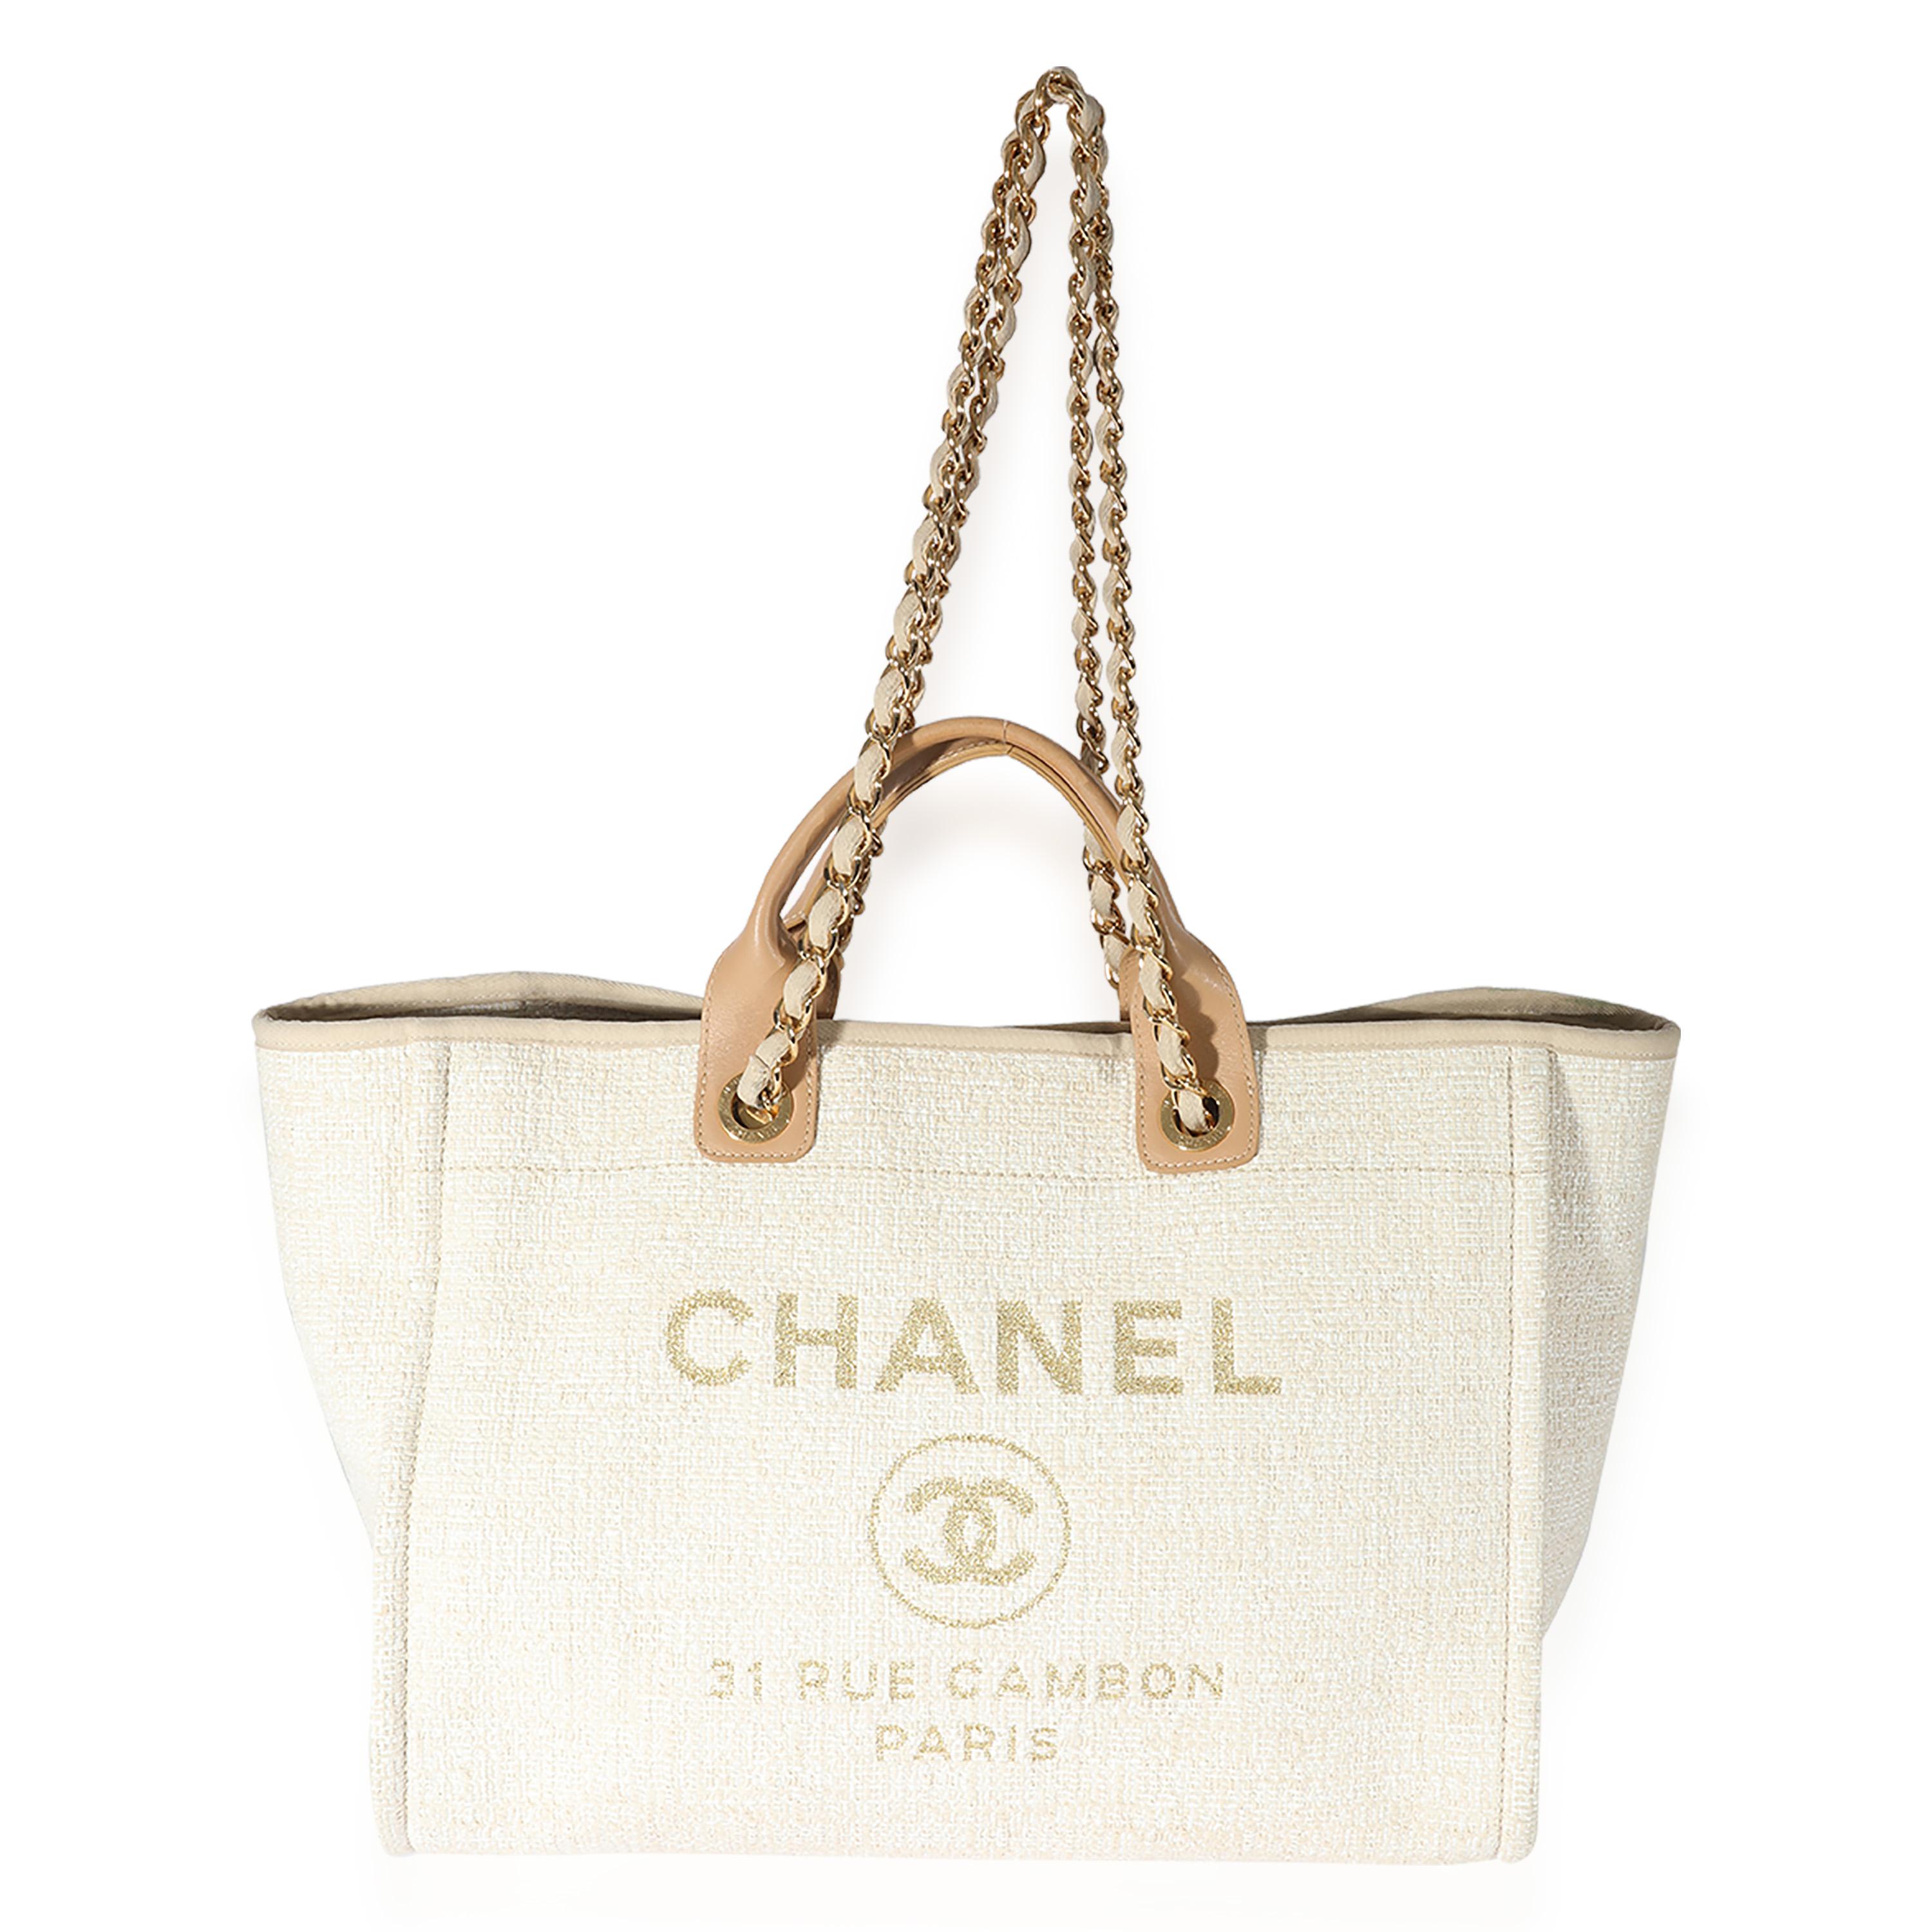 Listing Title: Chanel Creme Canvas Large Deauville Tote
SKU: 126288
Condition: Pre-owned 
Handbag Condition: Very Good
Condition Comments: Very Good Condition. Light scuffing, discoloration at straps and at exterior. Scratching at hardware.